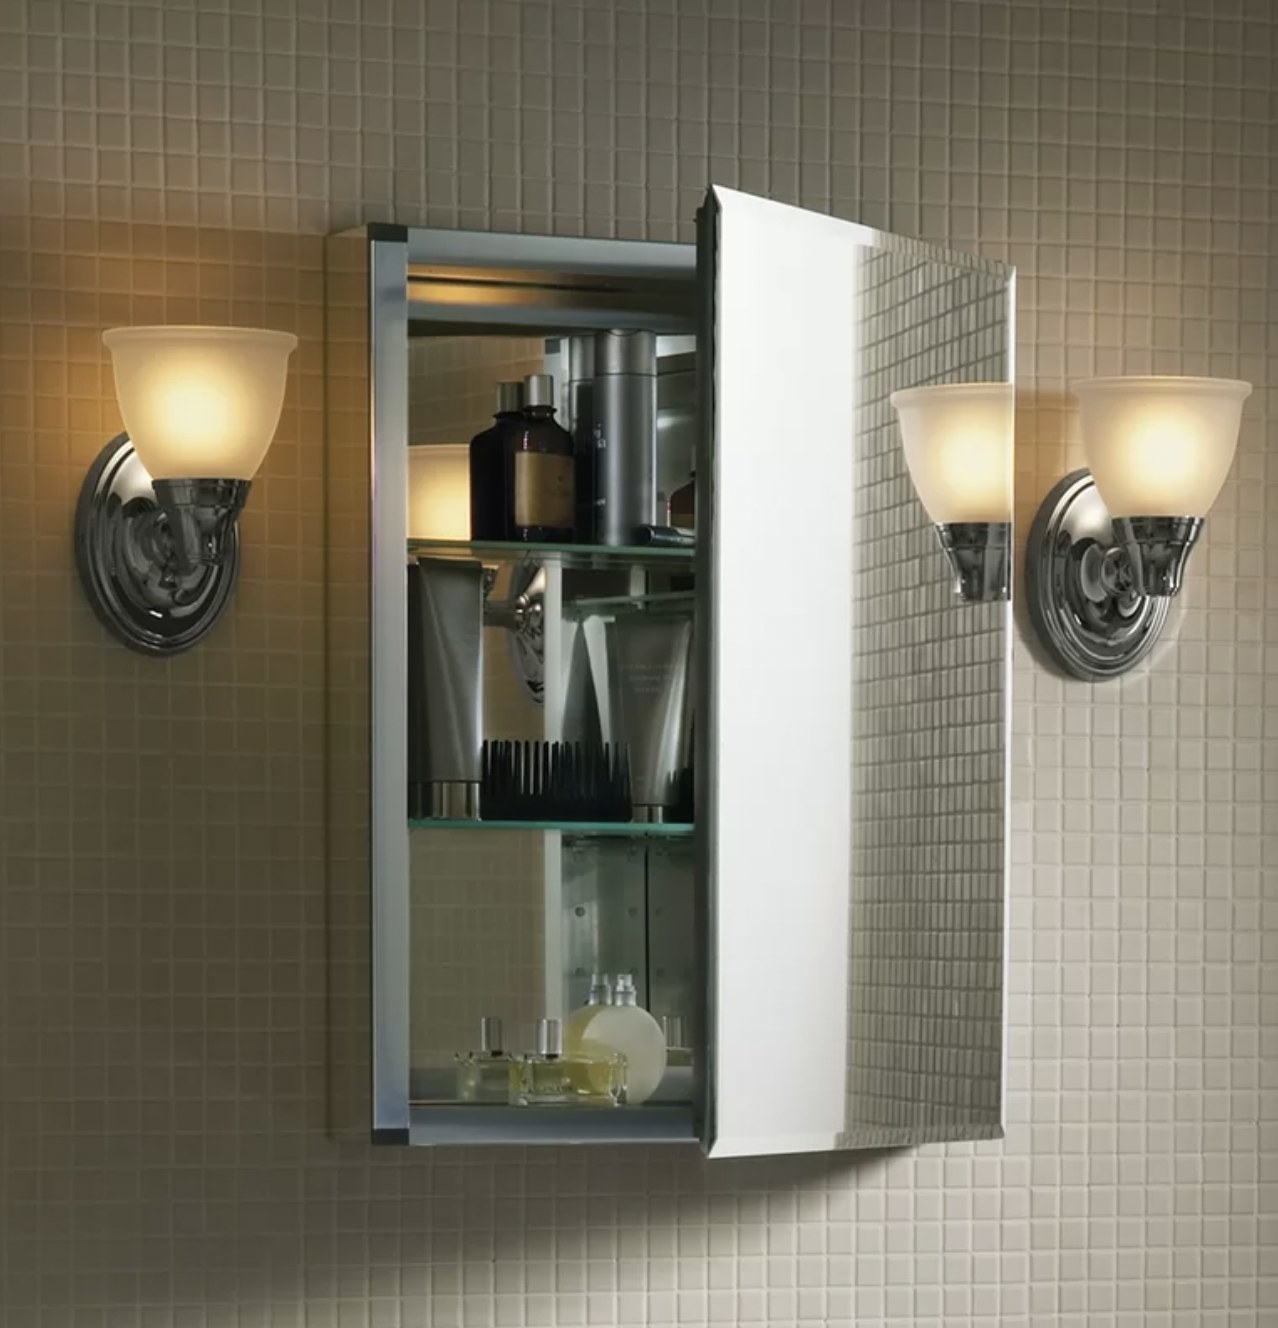 The mirrored cabinet installed in bathroom wall with door propped open